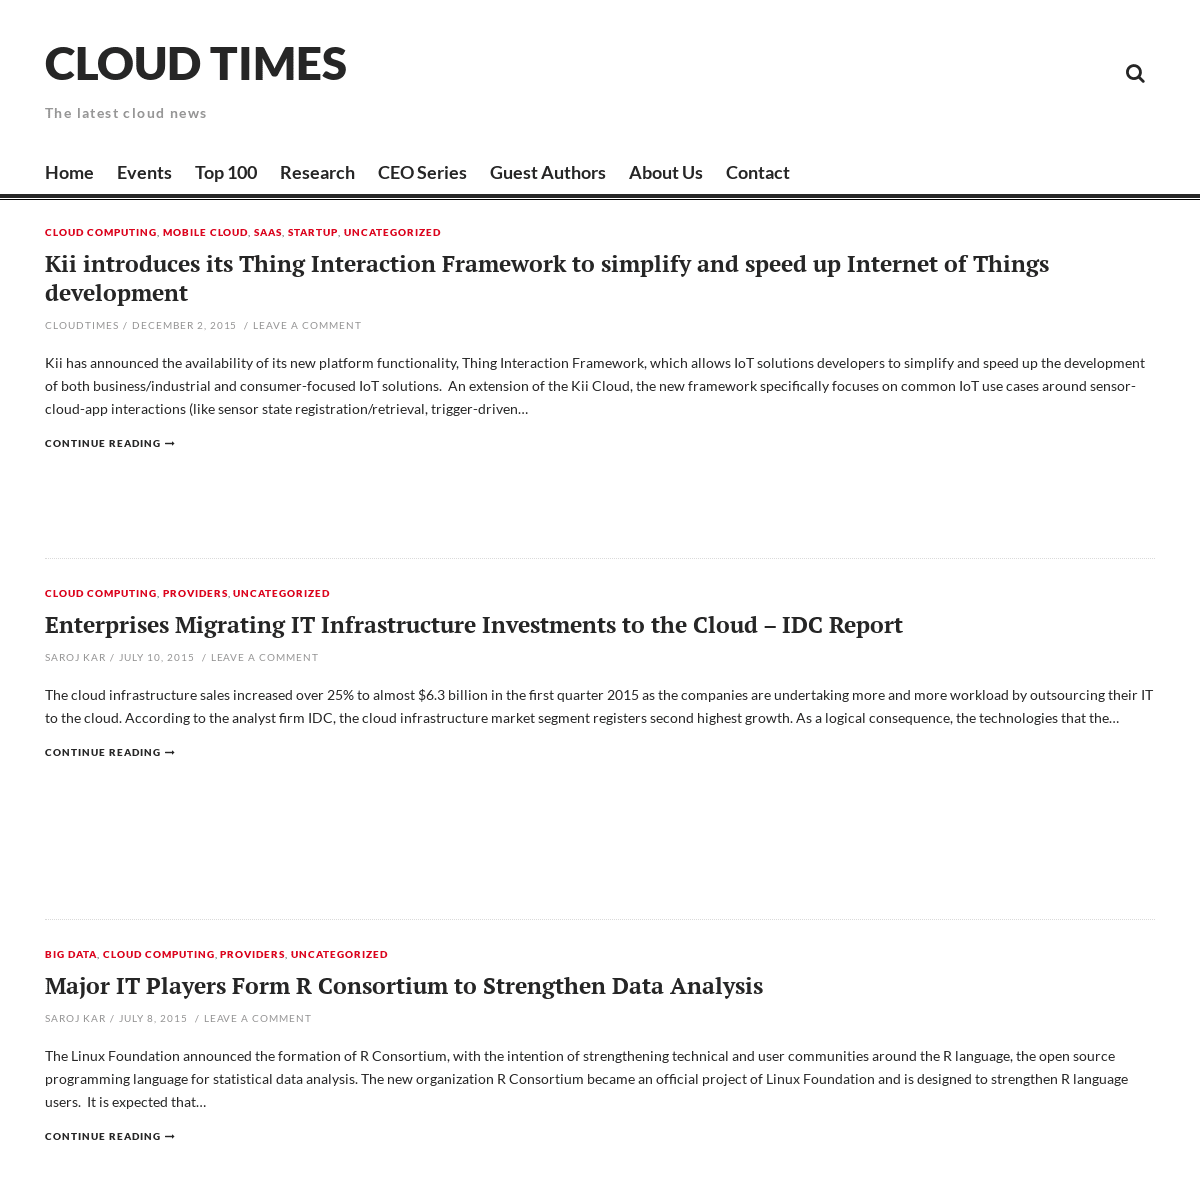 A complete backup of https://cloudtimes.org